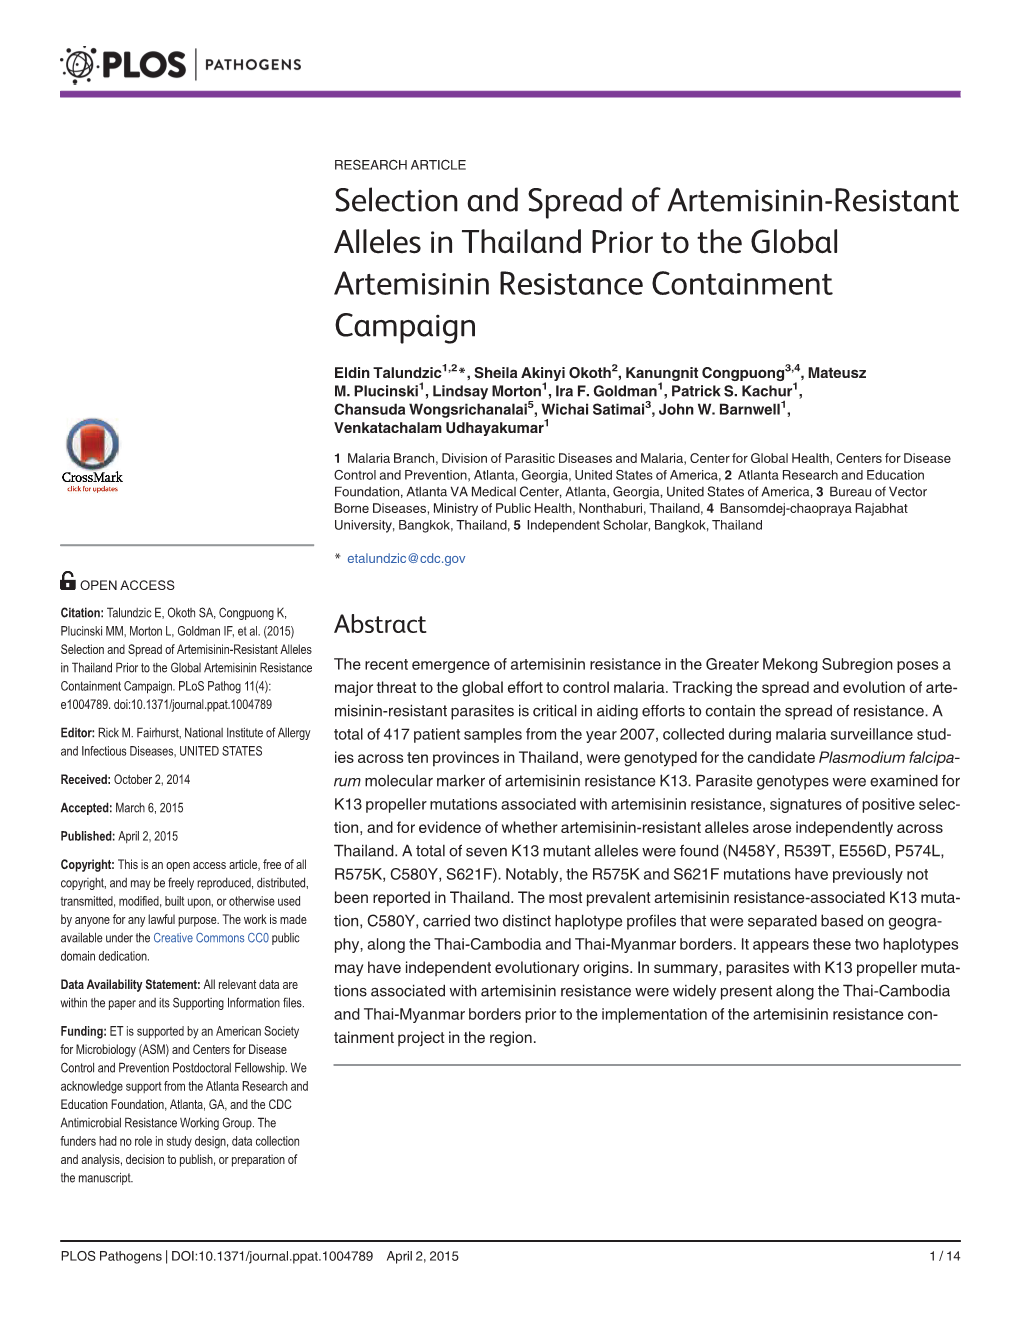 Selection and Spread of Artemisinin-Resistant Alleles in Thailand Prior to the Global Artemisinin Resistance Containment Campaign